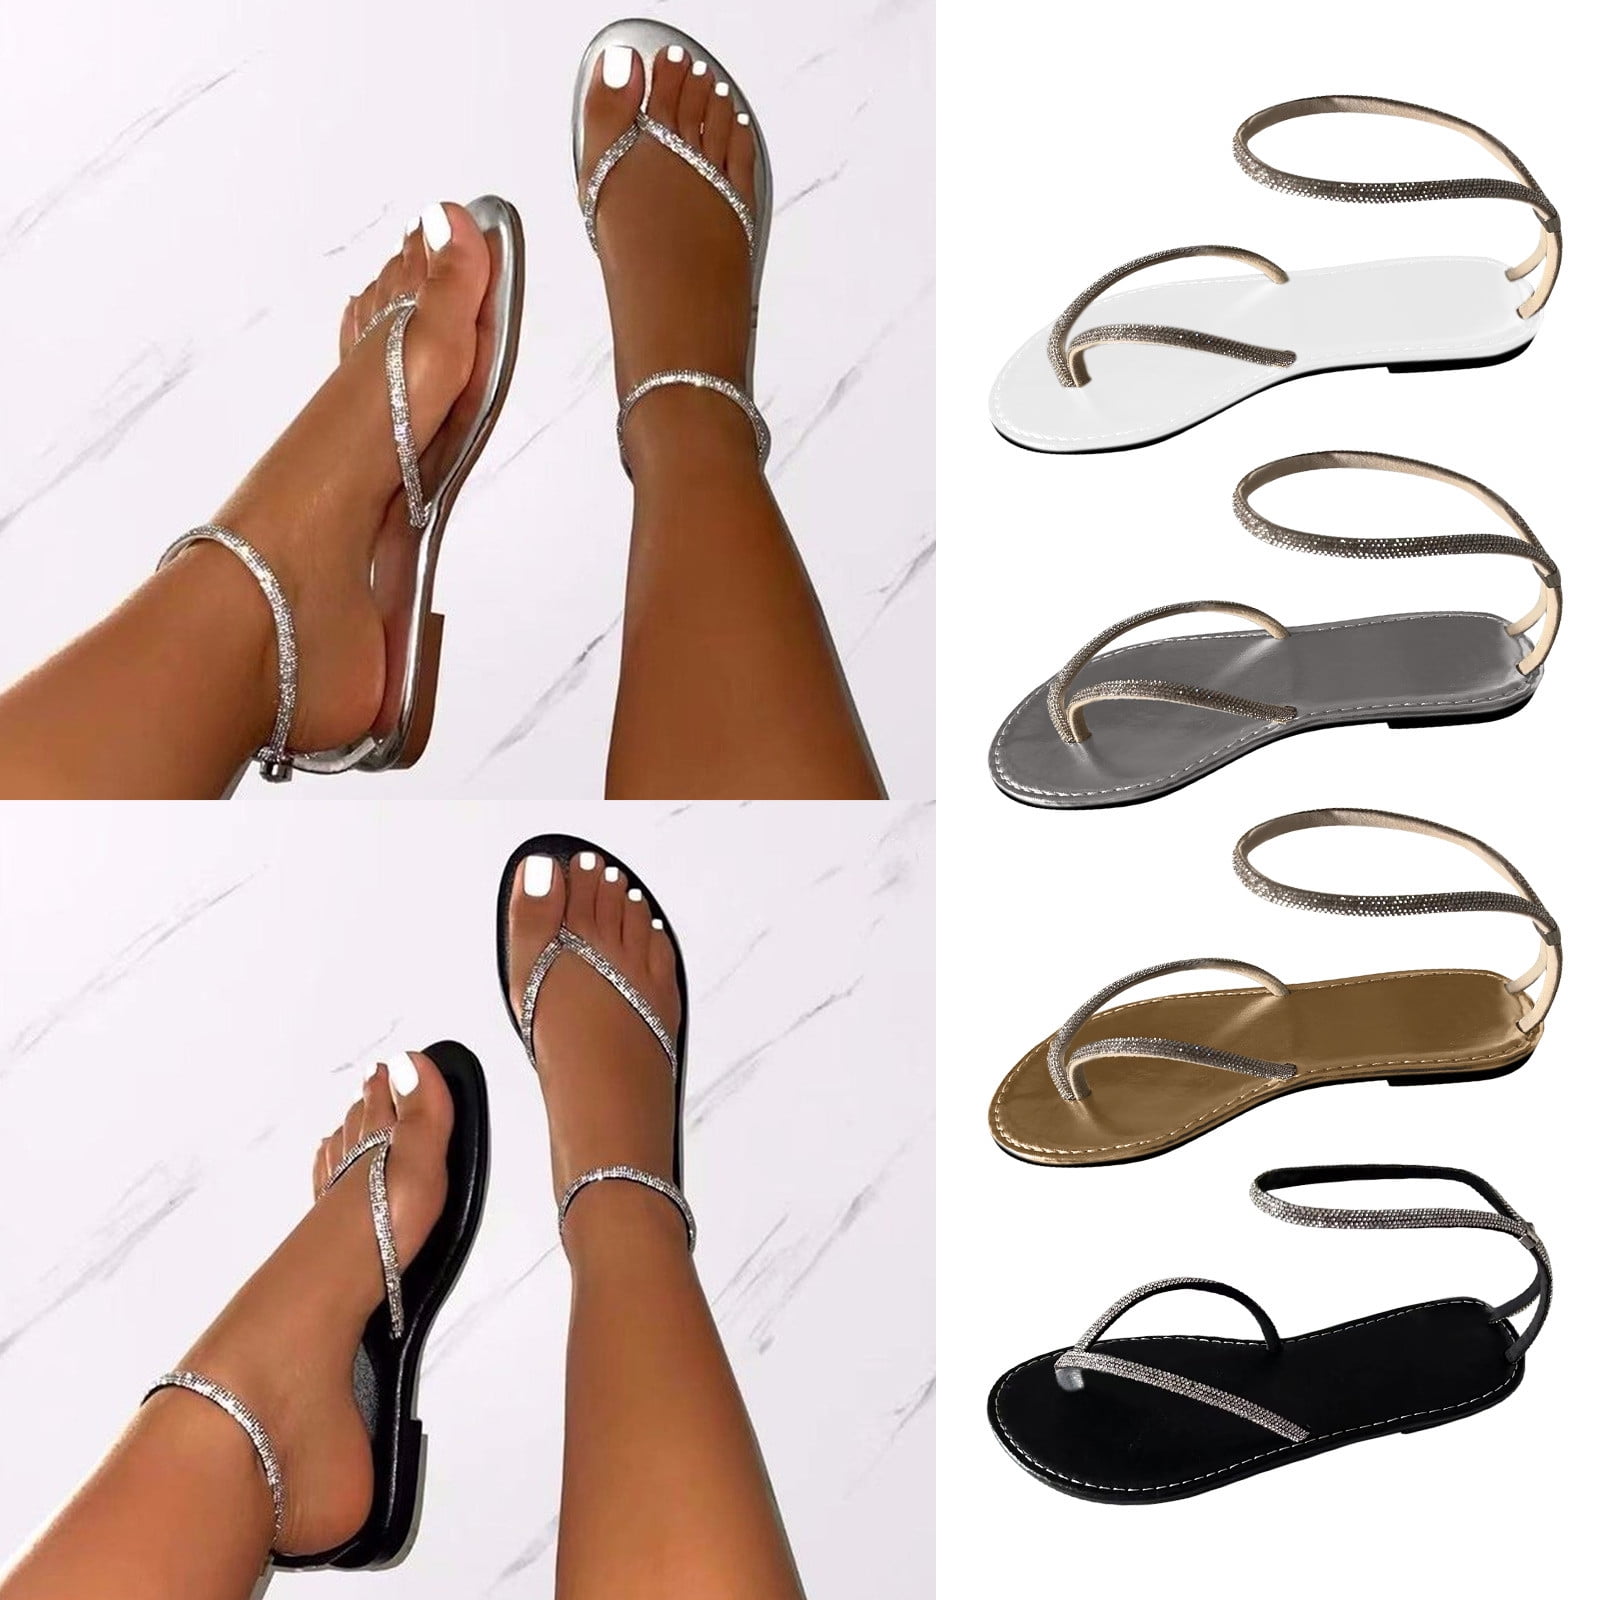 Cethrio Womens Summer Flats Sandals- Flat with Rhinestone Flip Flops Sling  on Clearance Wide Width Silver Dressy Sandals/ Slides Size 5.5 